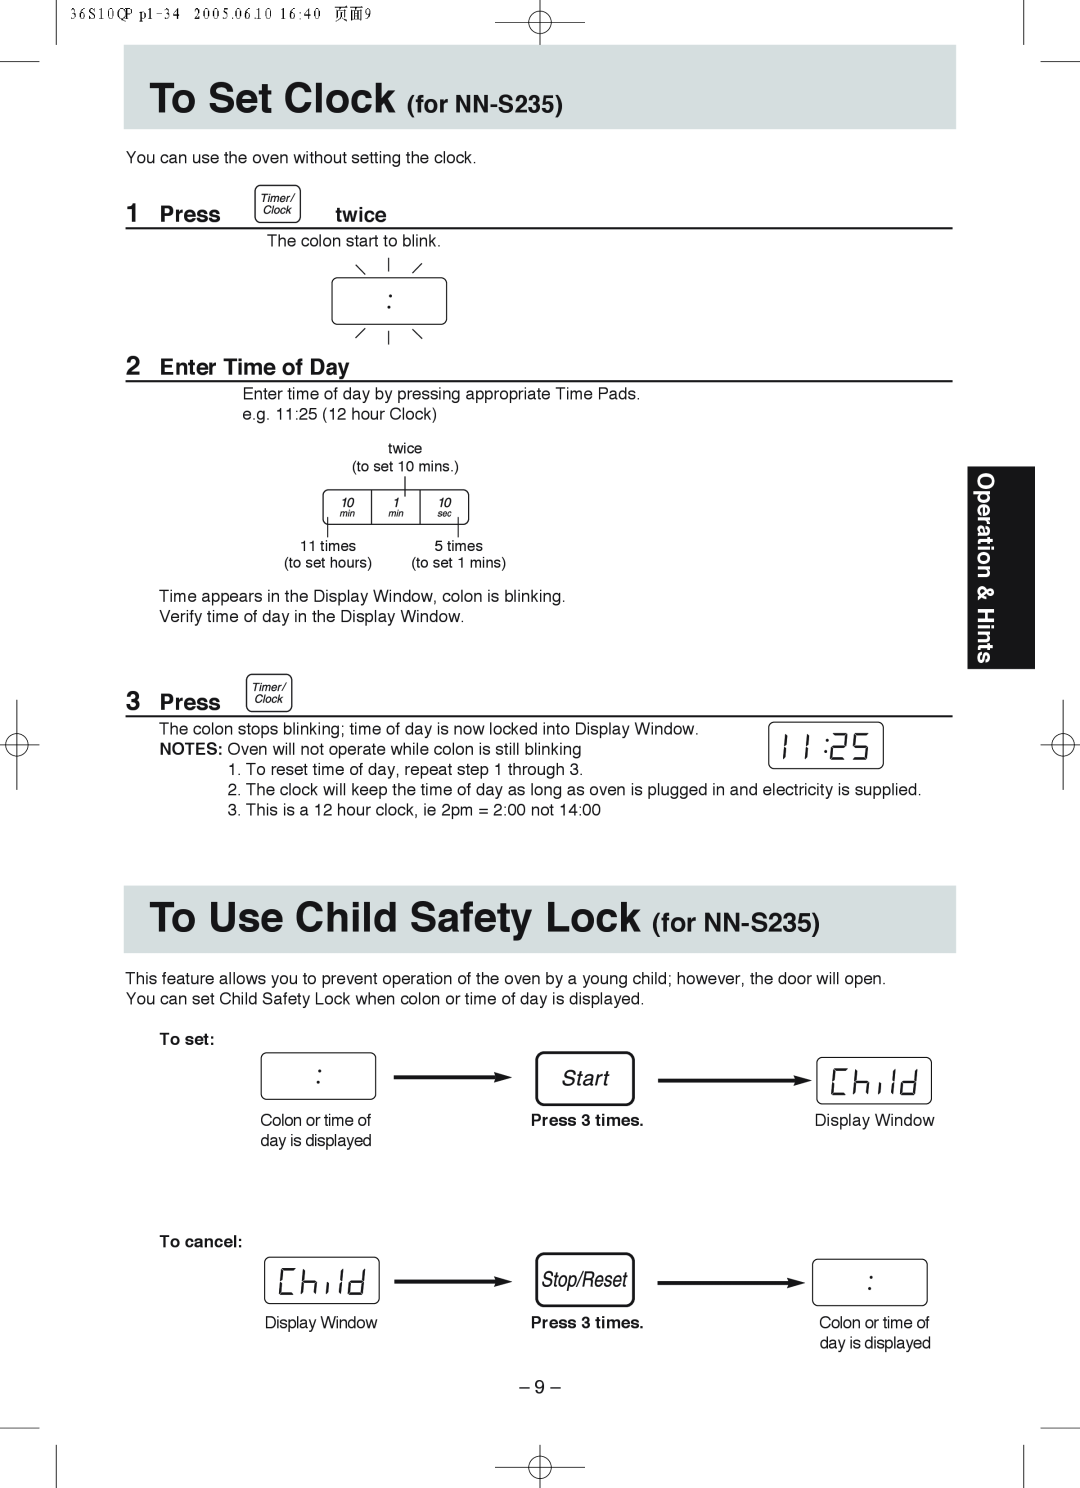 Panasonic NN-S215 manual To Set Clock for NN-S235, To Use Child Safety Lock for NN-S235, Press, Enter Time of Day, twice 